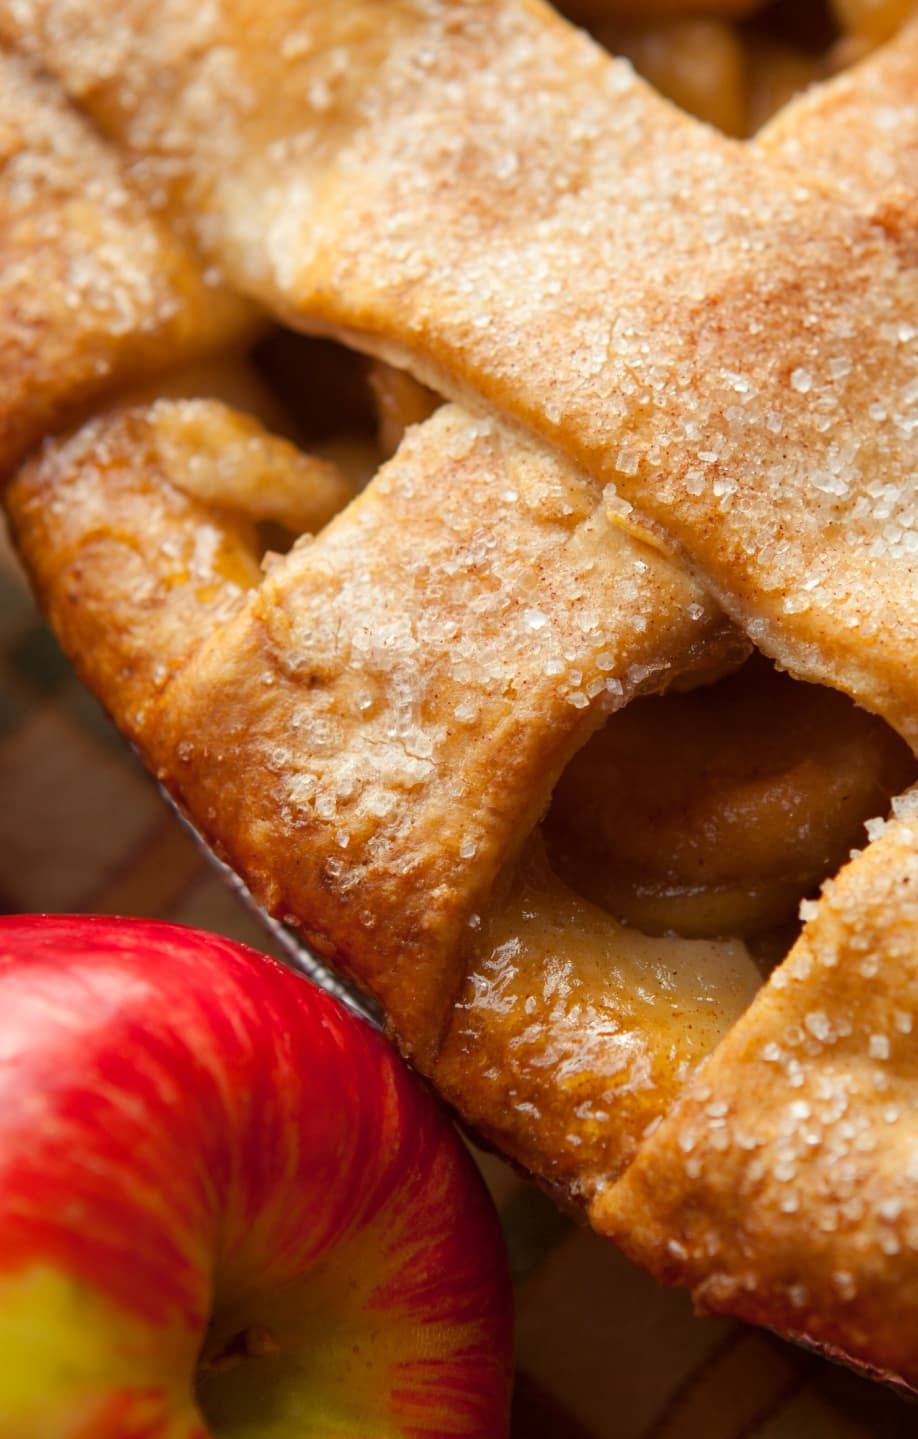 A fresh, delicious-looking apple pie cooling on a countertop